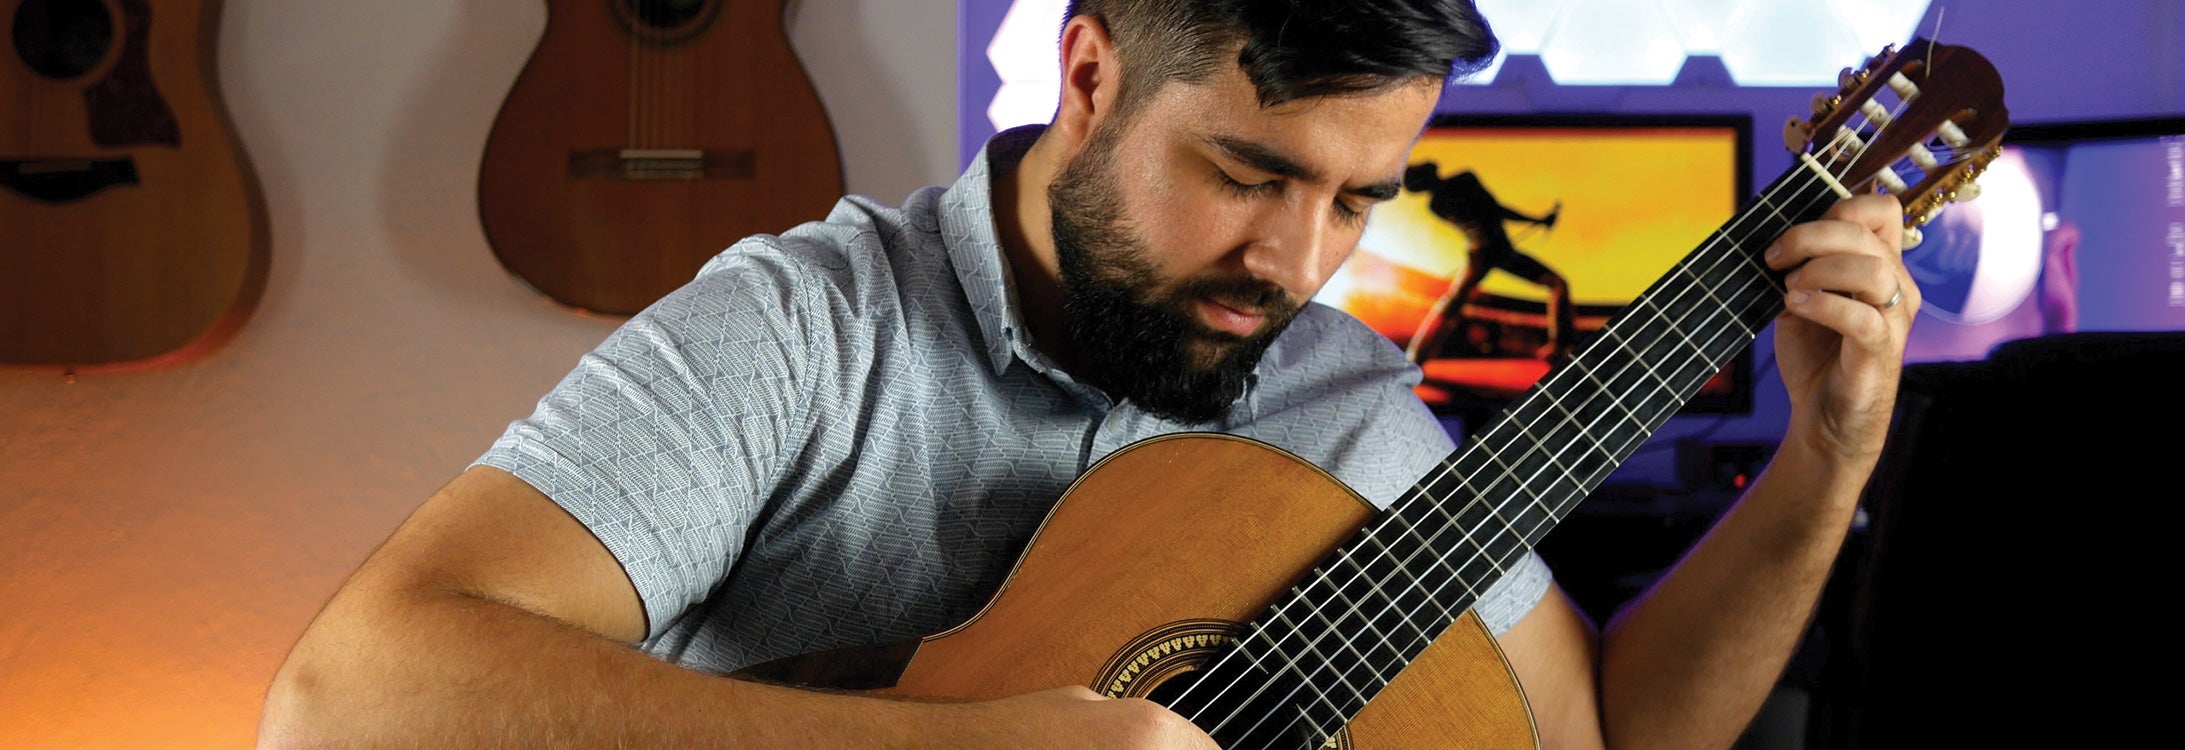 Nathan Mills is making a living playing popular movie and game themes on classical guitar.